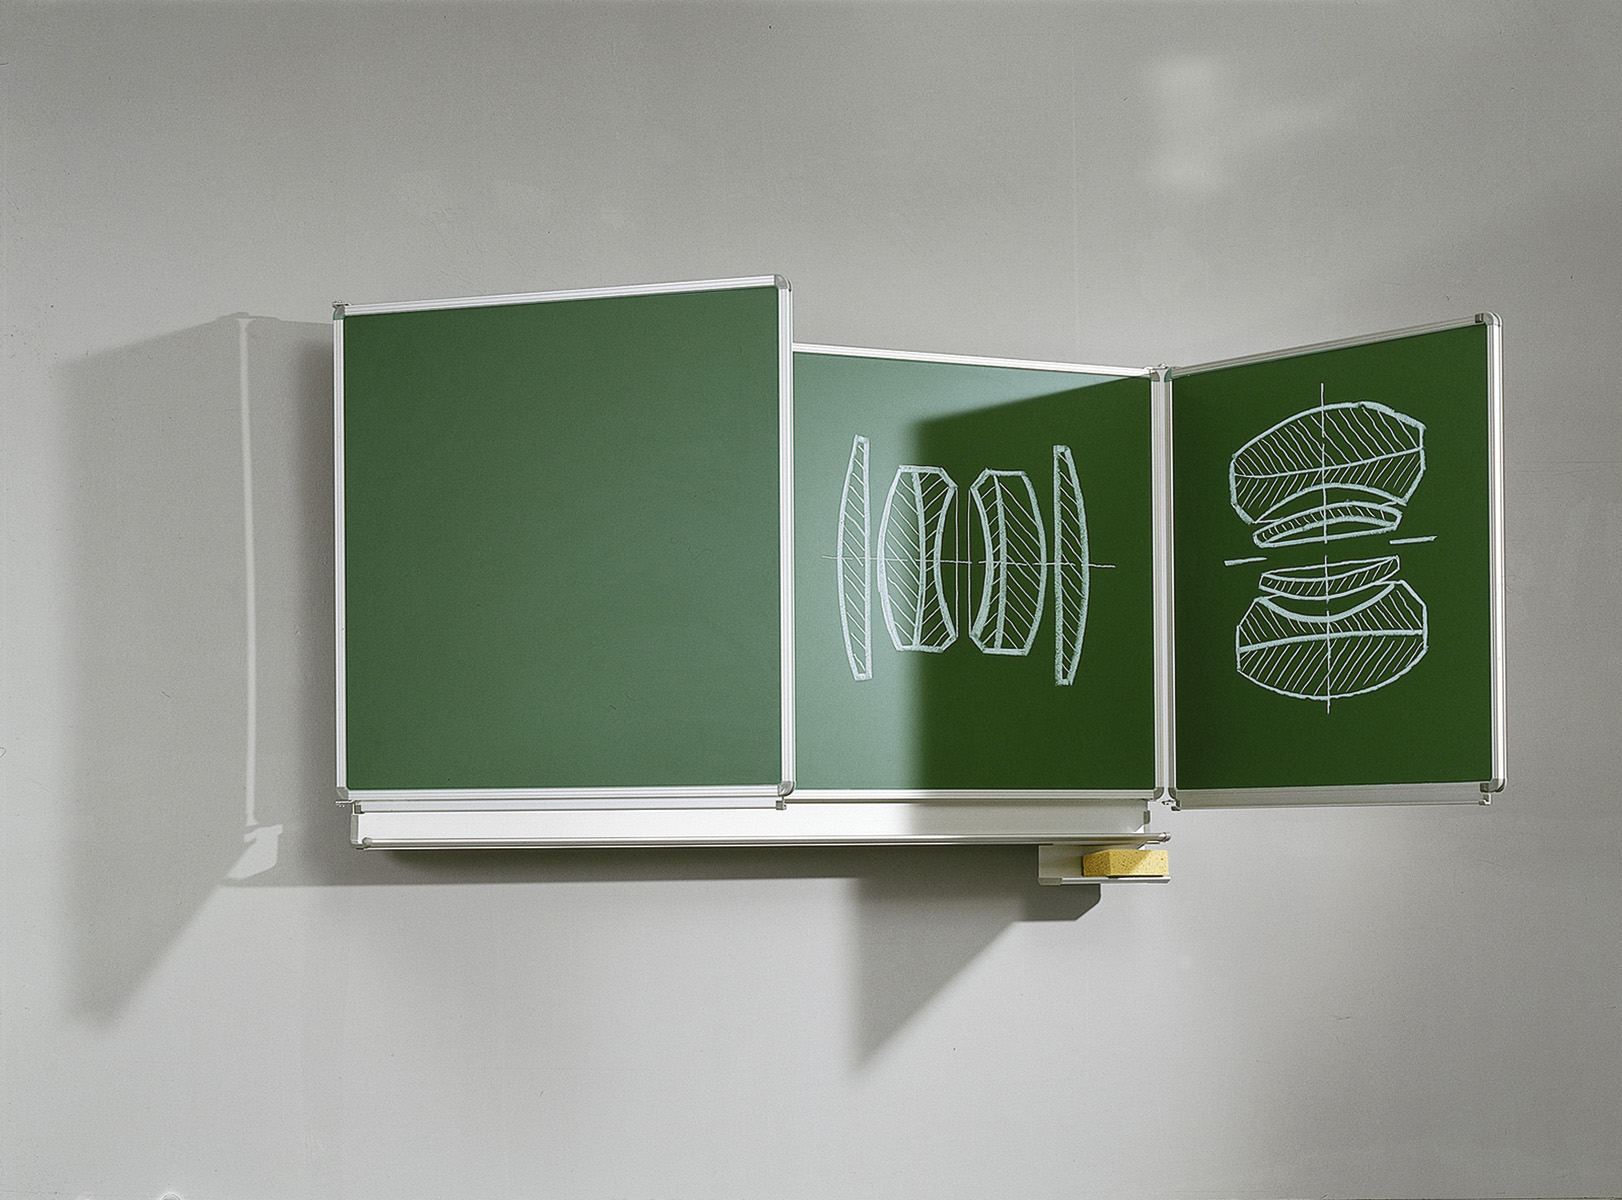 Vario green chalkboard with side wing